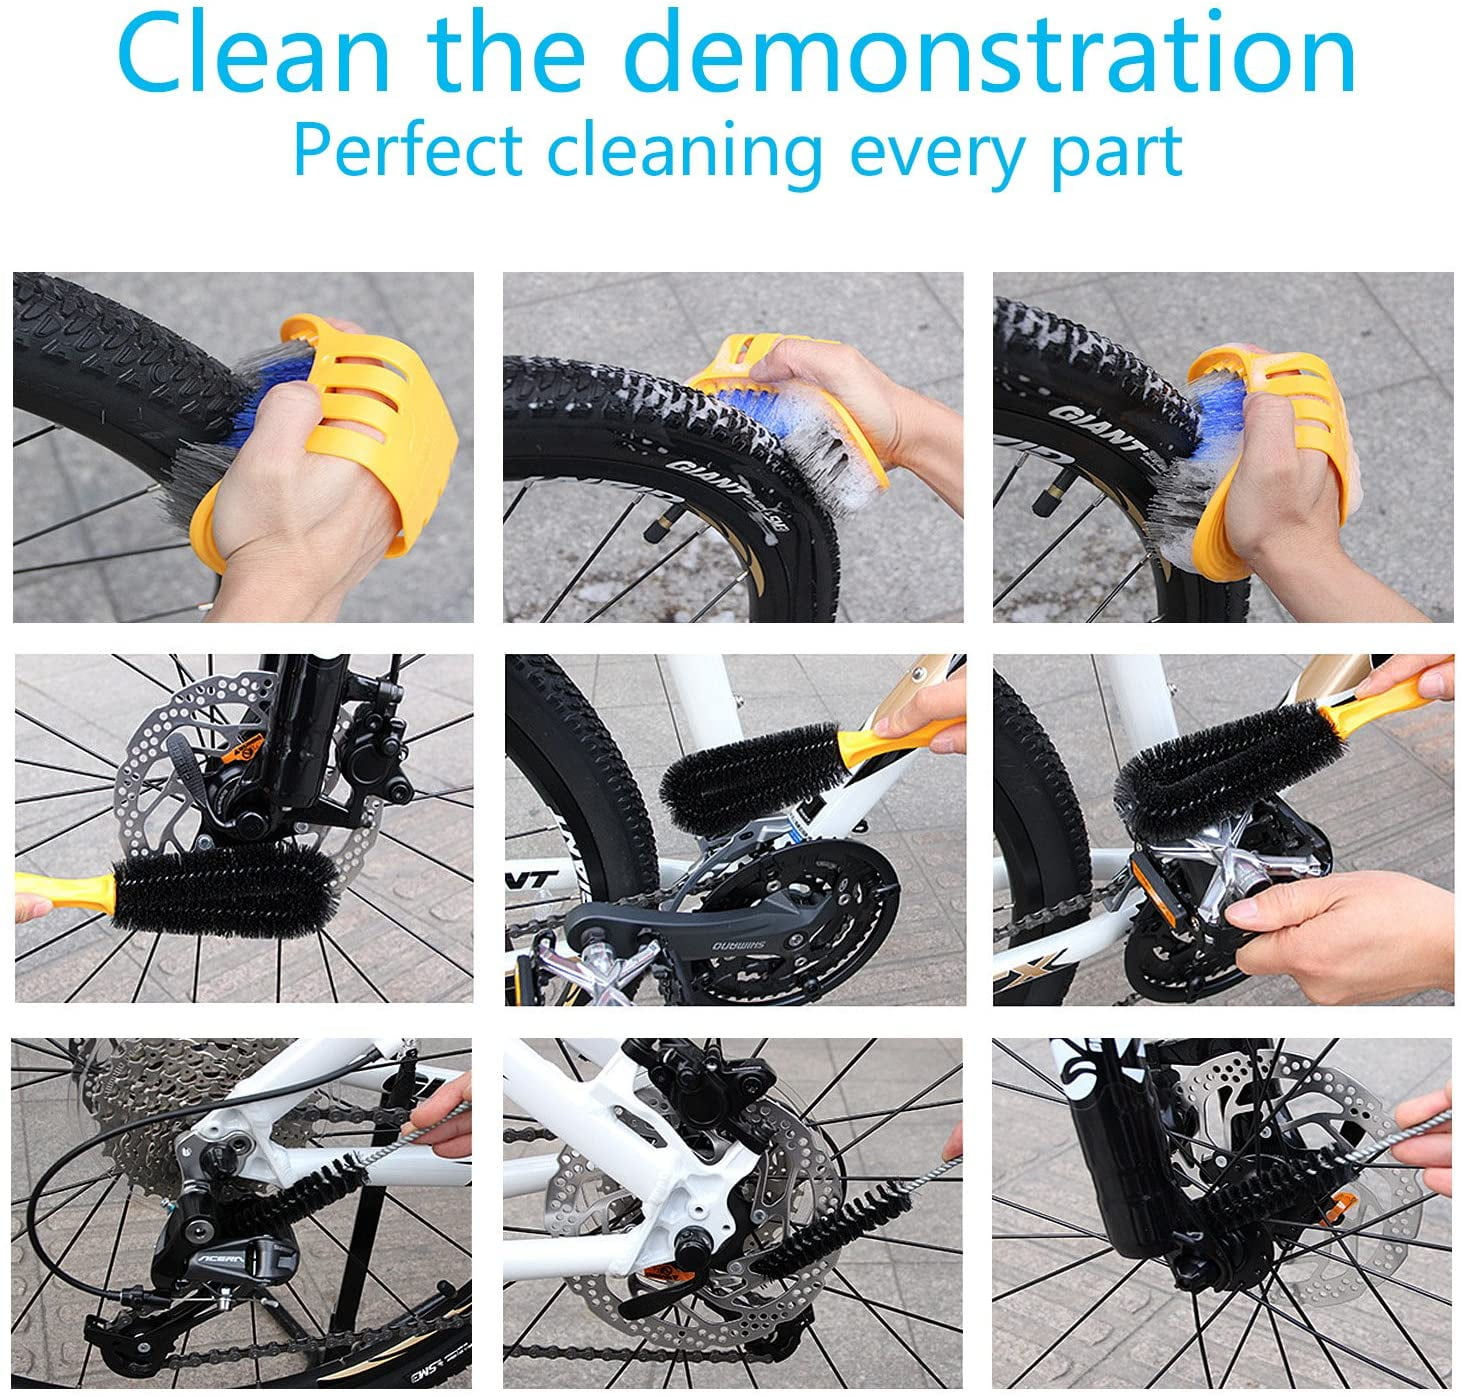 Fit All Bike GZCRDZ 6pcs Bike Bicycle Clean Brush Kit/ Cleaning Tools for Bike Chain/Crank/Tire/Sprocket Cycling Corner Stain Dirt Clean